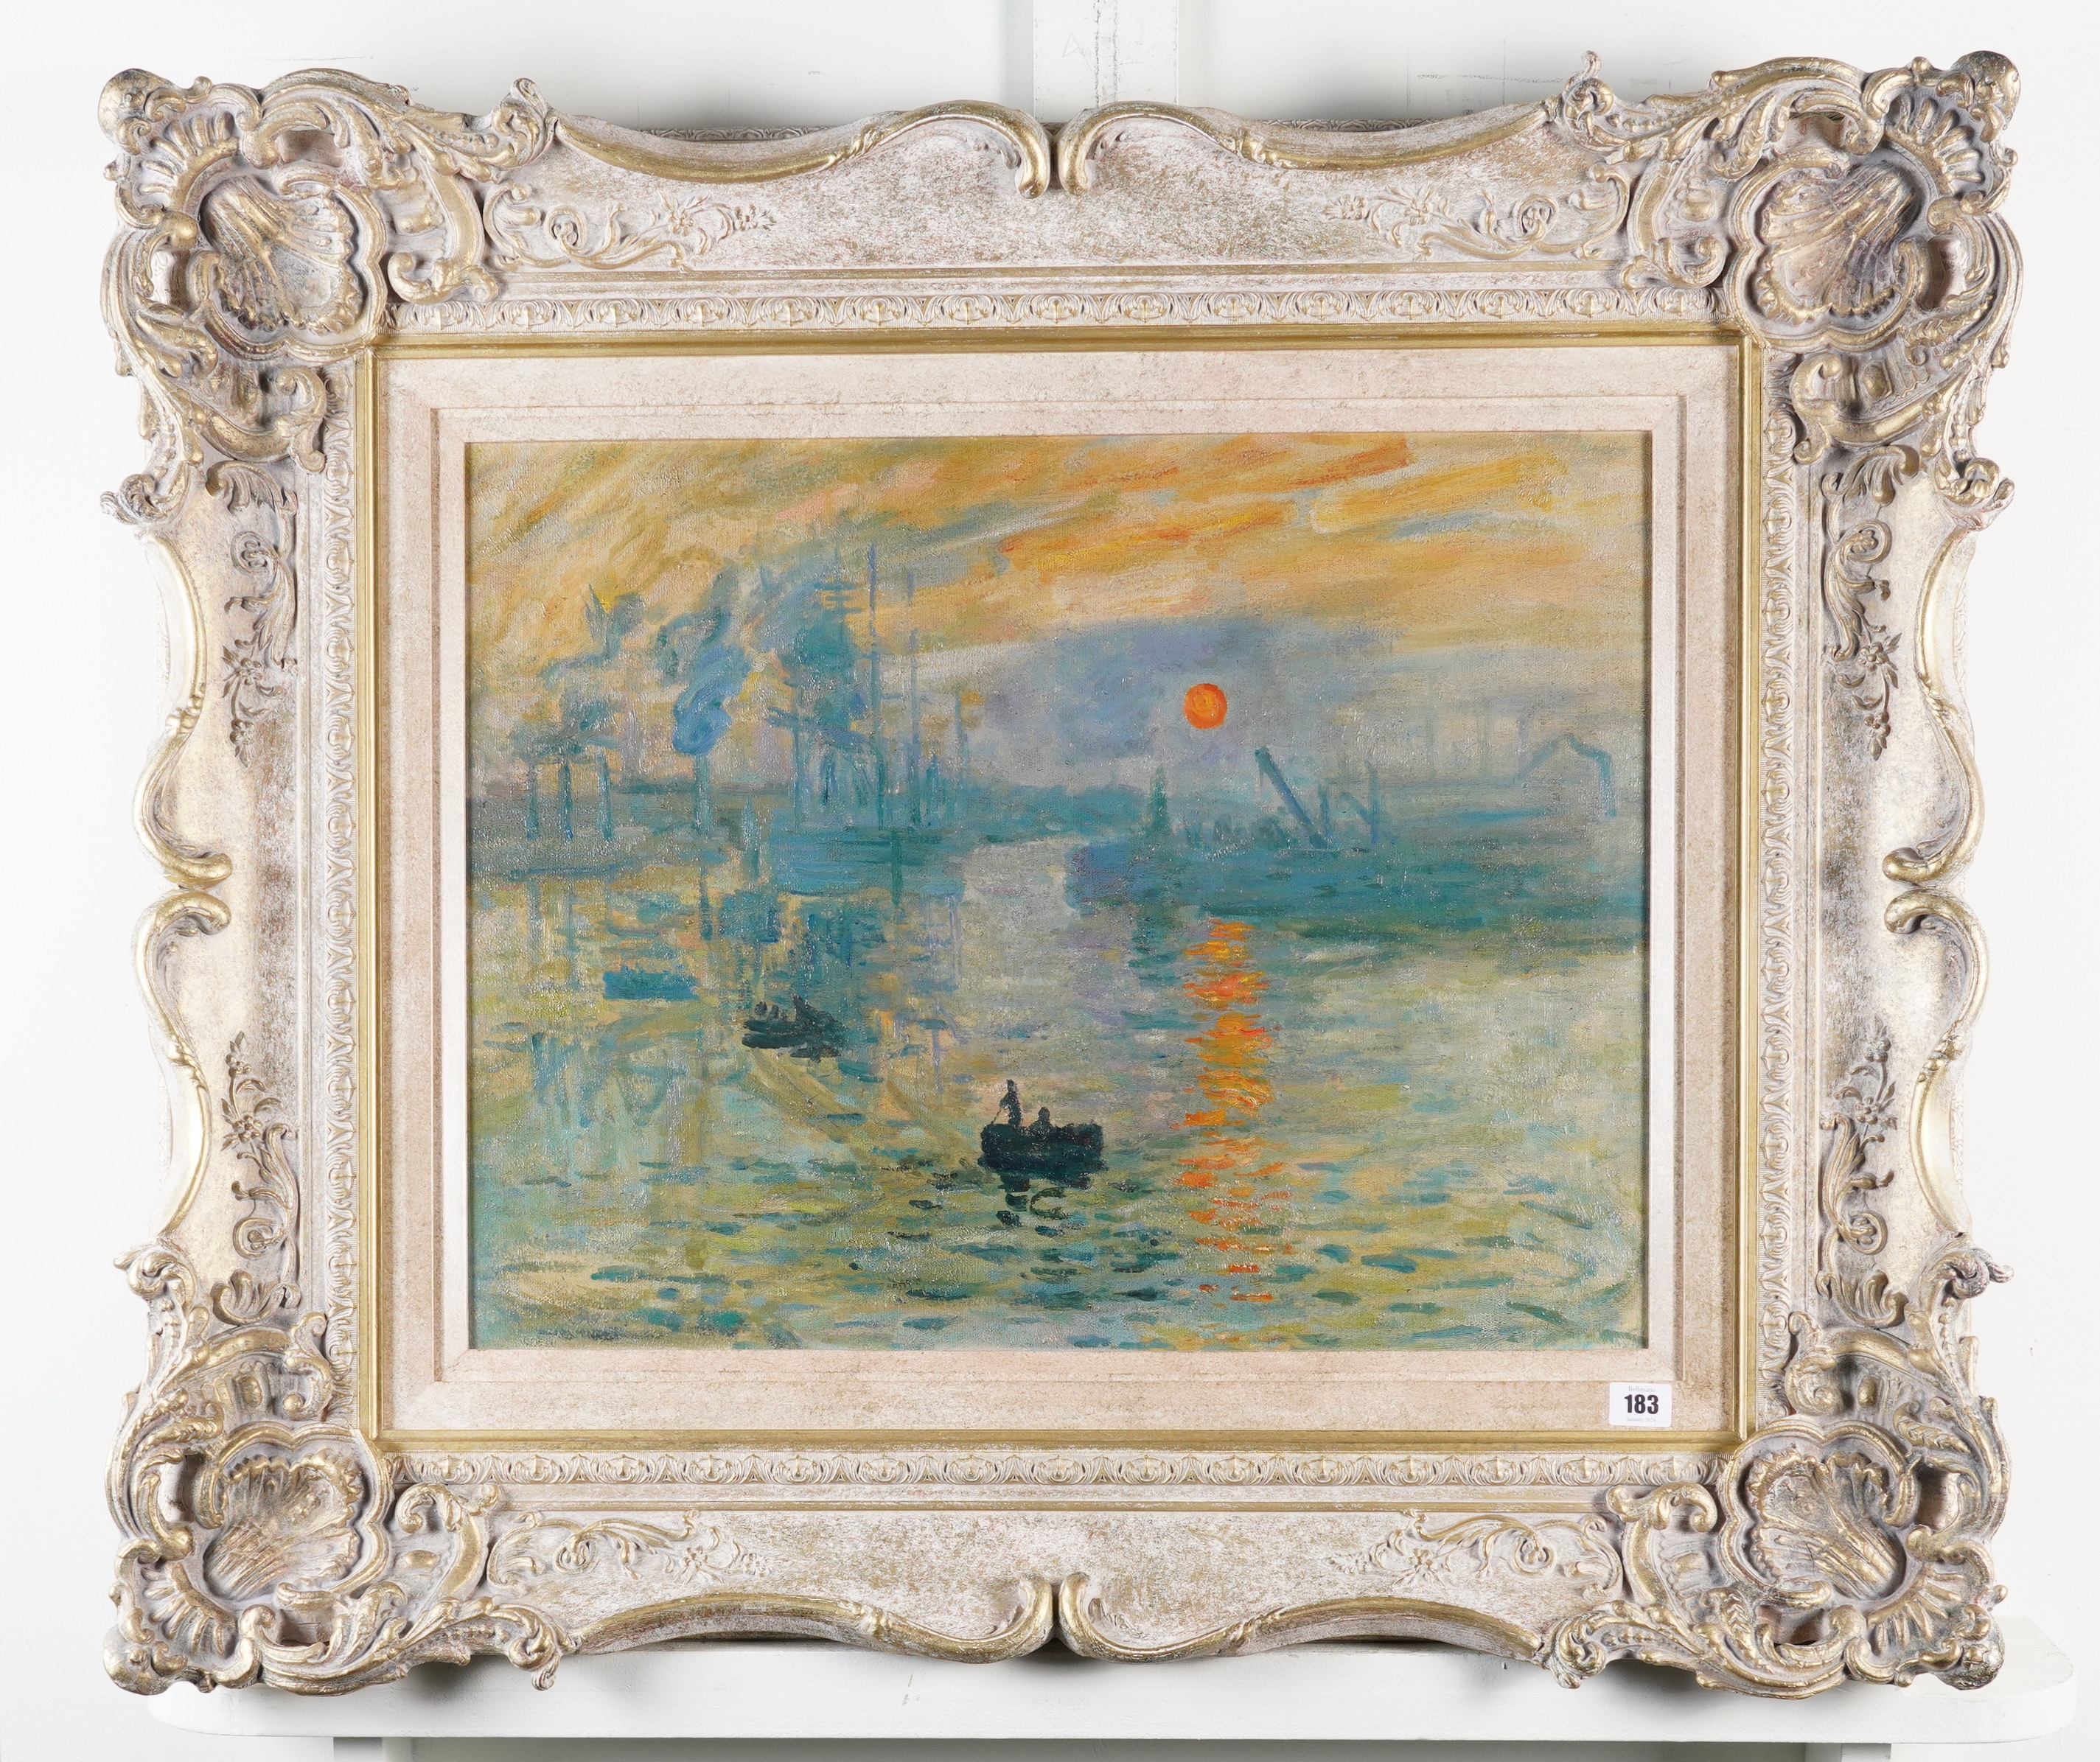 Artwork by Claude Monet, Impression Sunrise, Made of oil on canvas